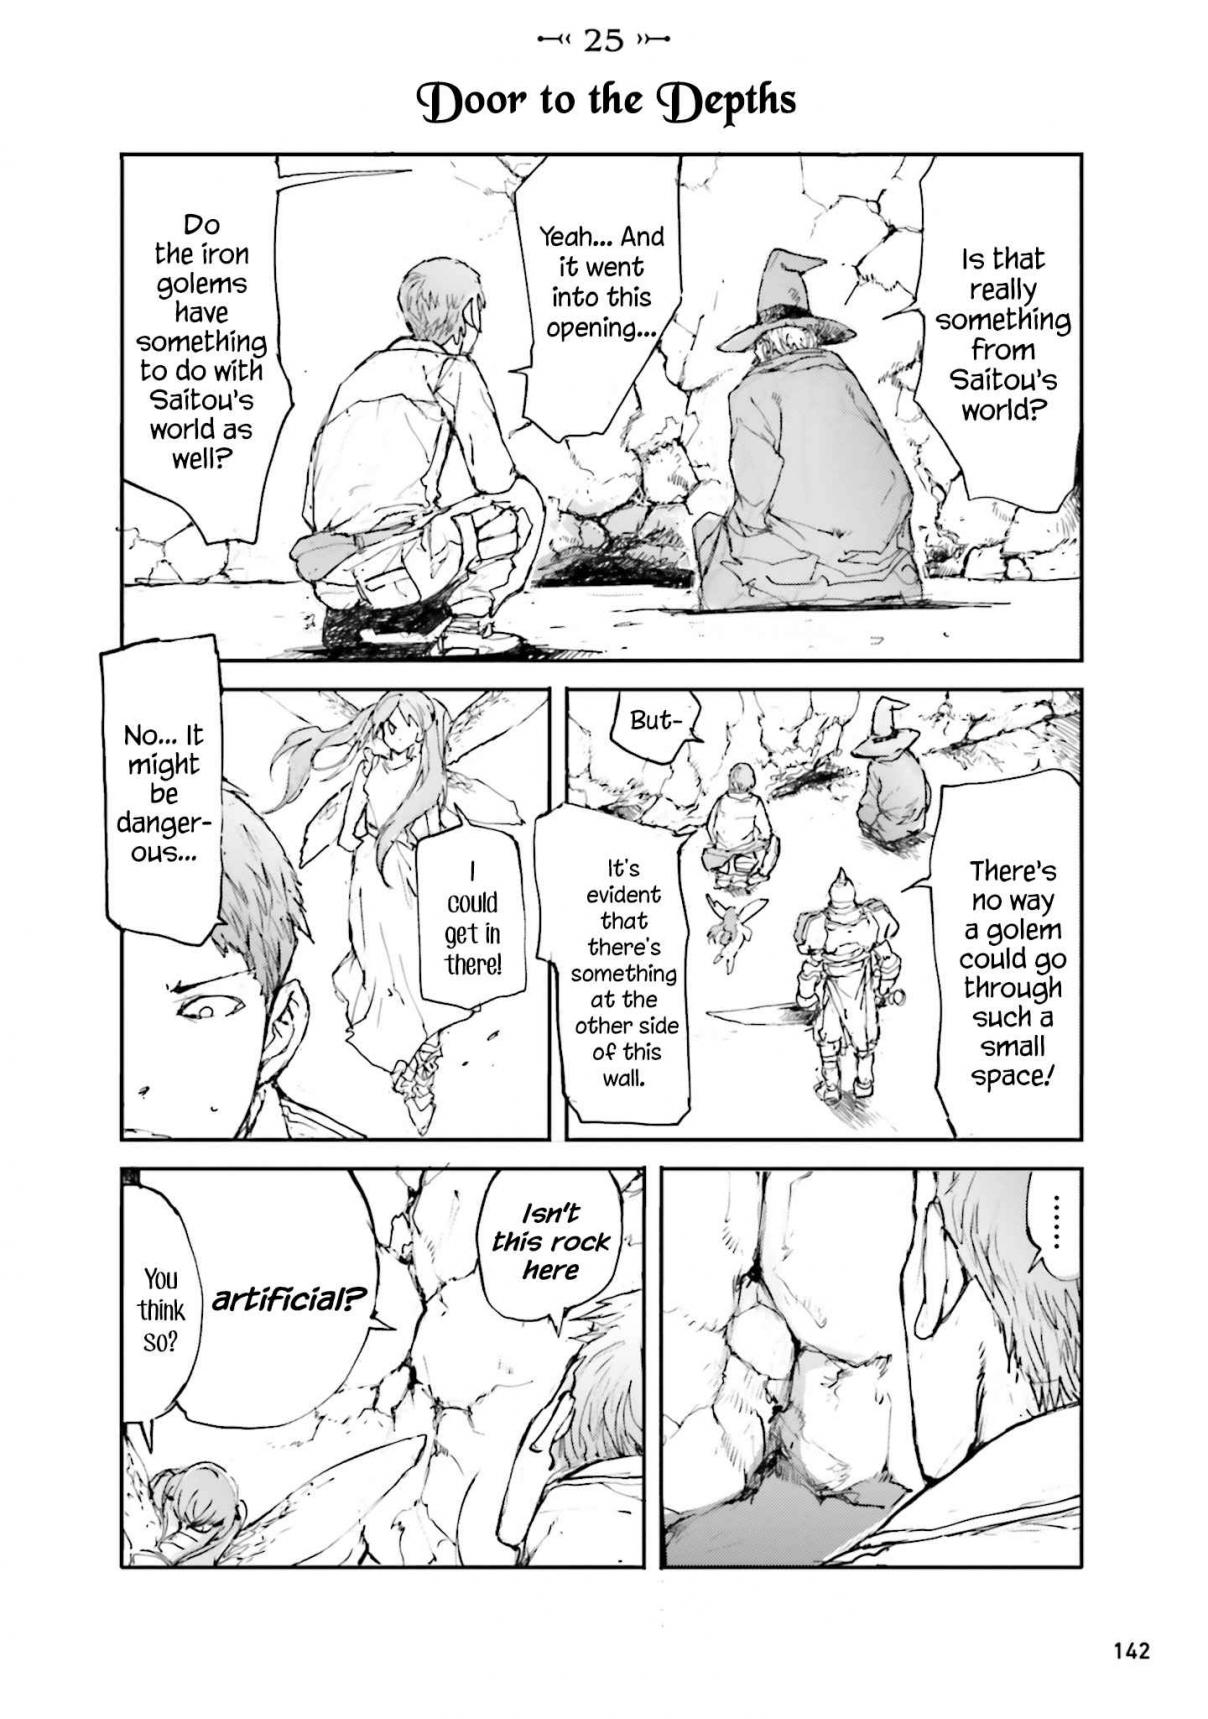 Handyman Saitou In Another World Ch. 25 Door to the Depths